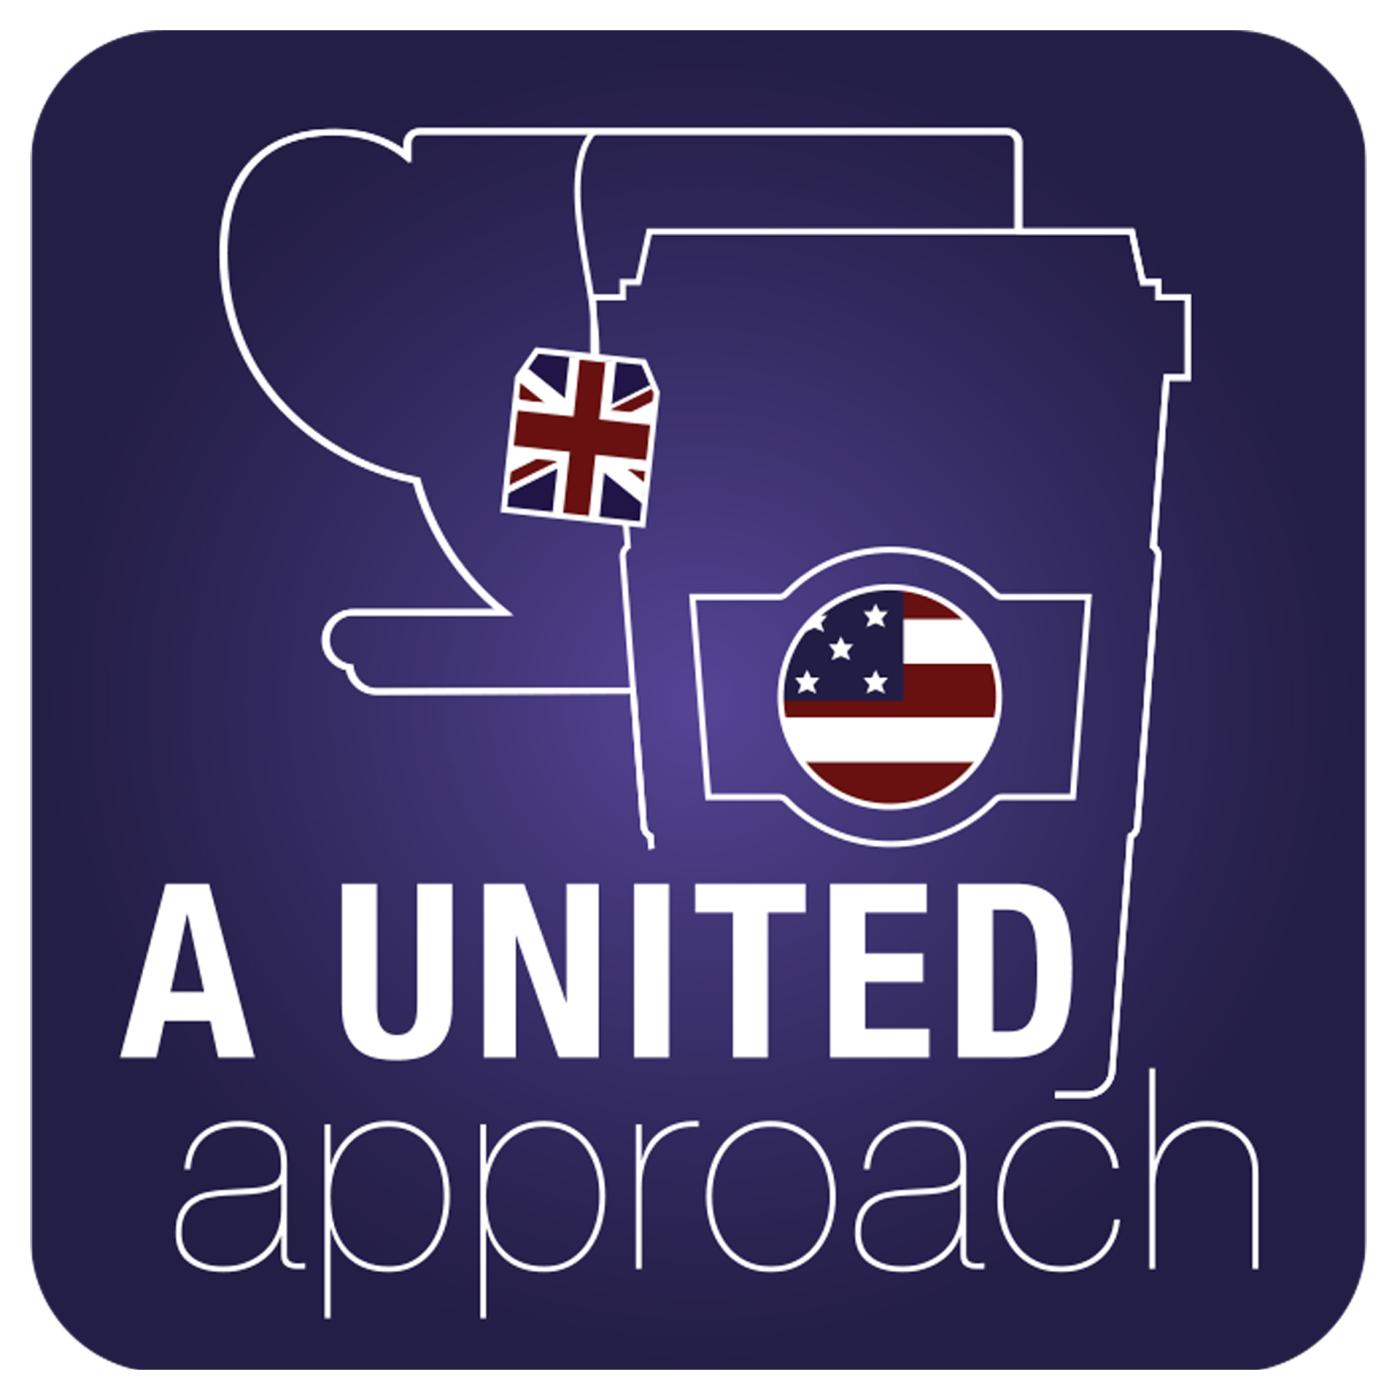 A united approach